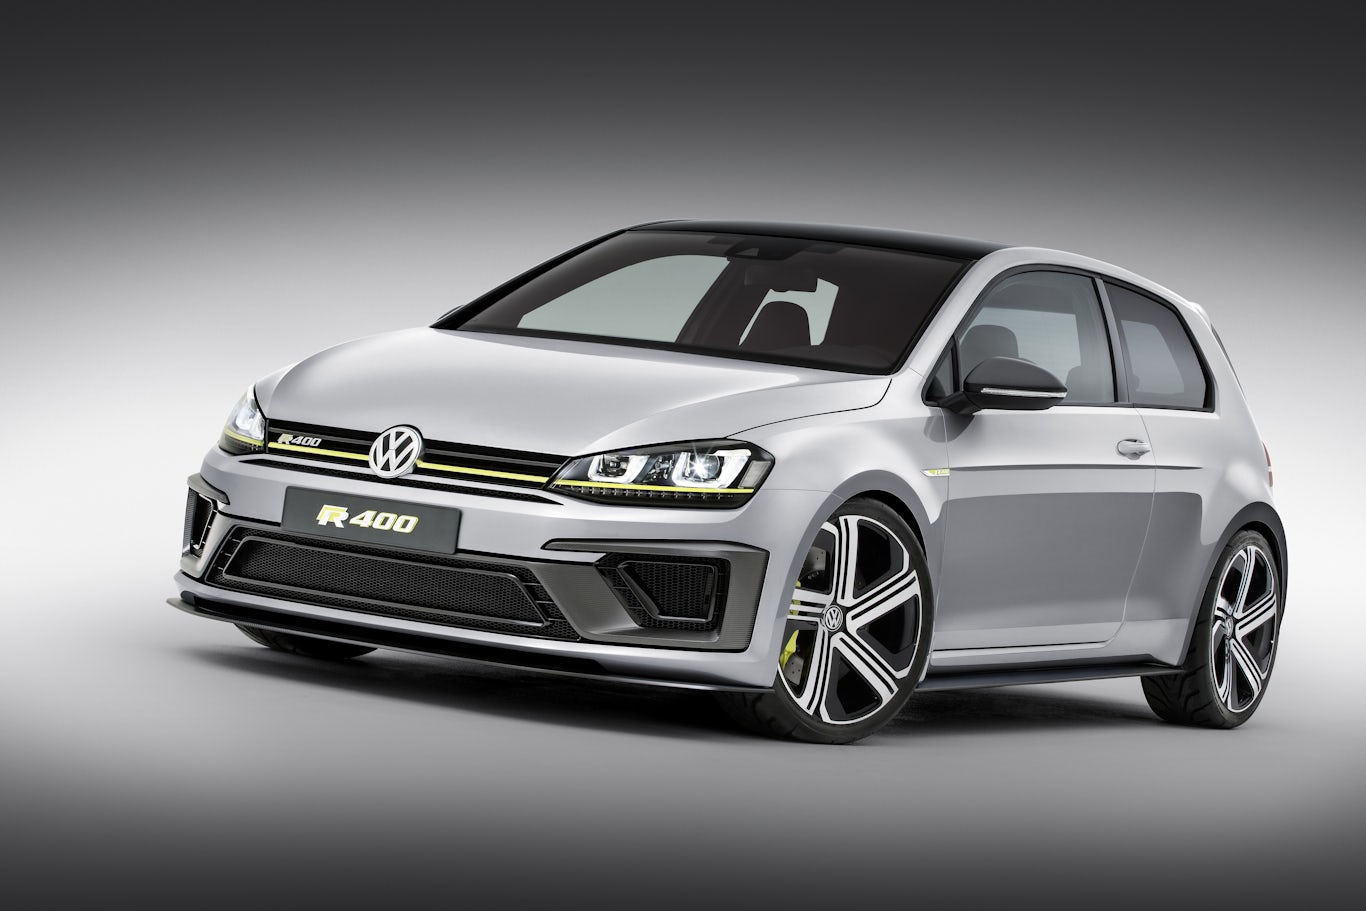 VW Golf R400 price, specs, release date carwow